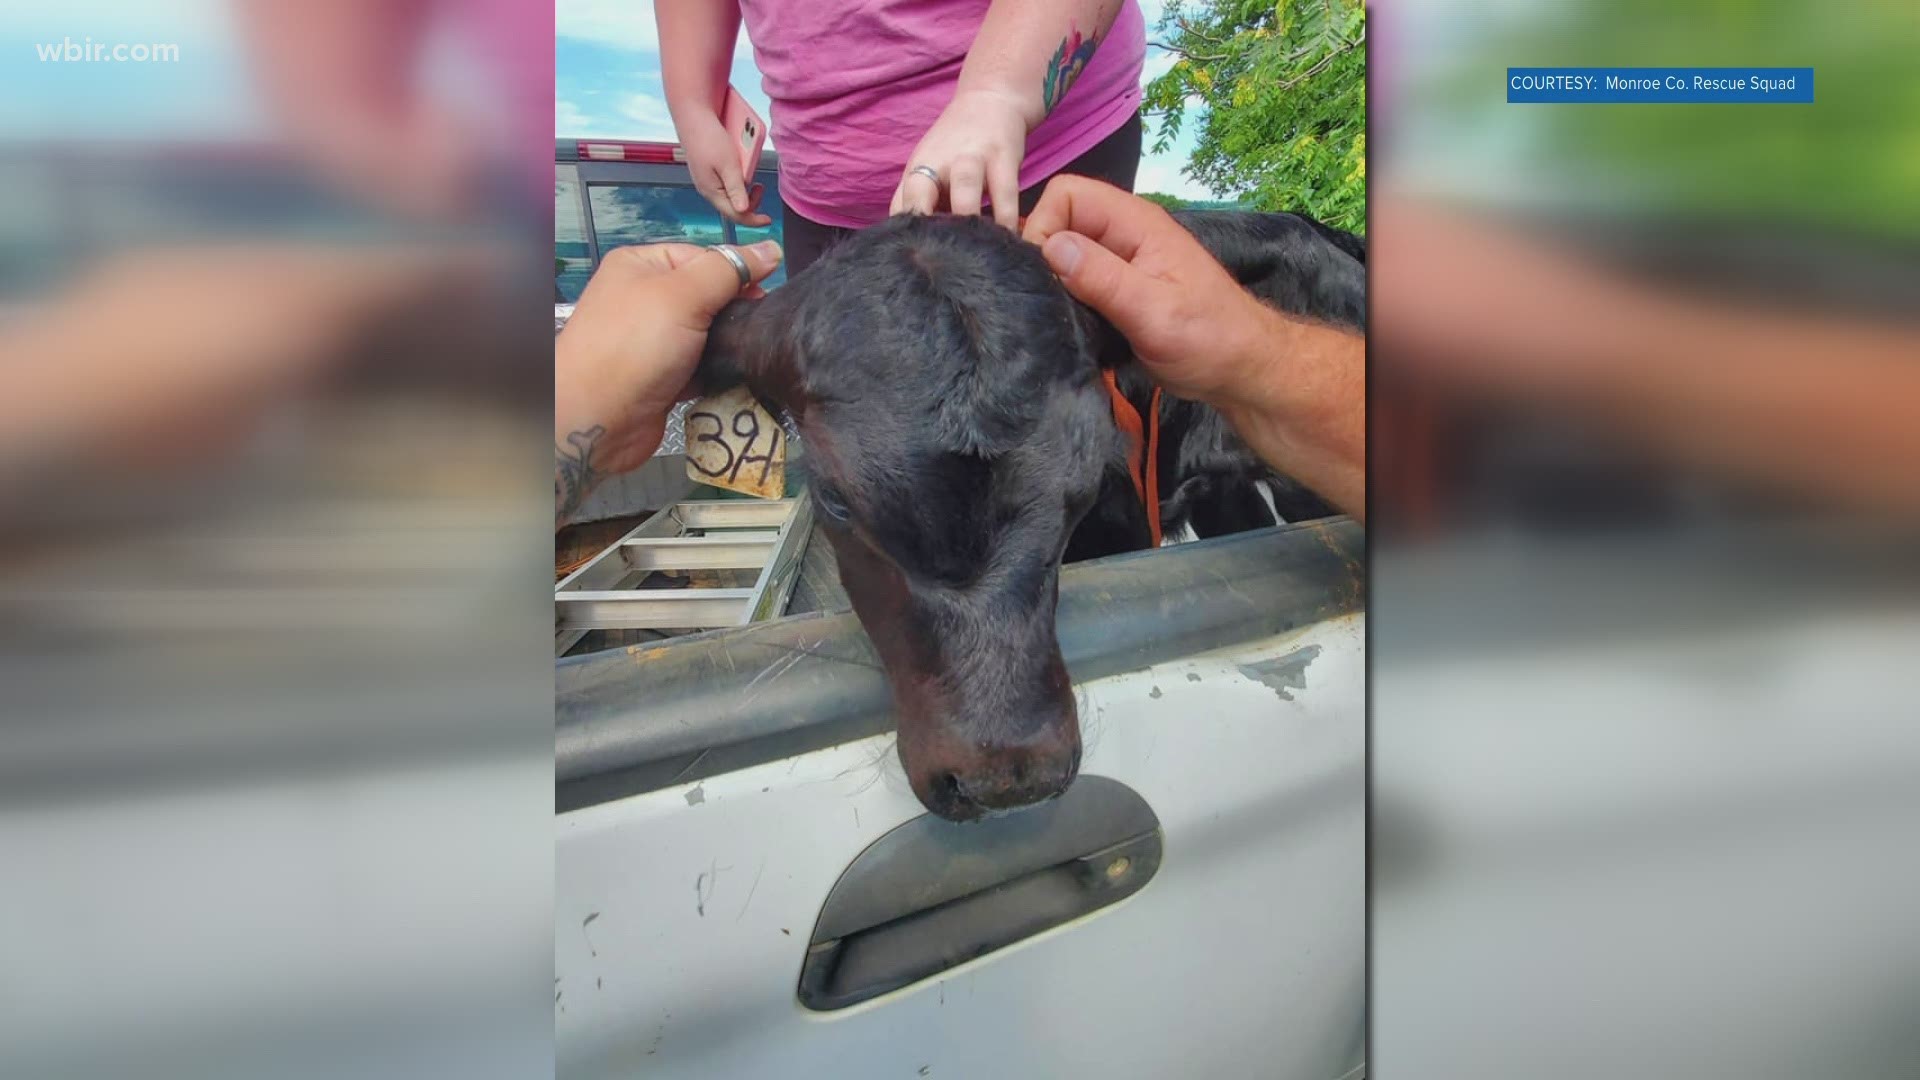 On Facebook, the rescue squad says the calf was found near a hole in Sweetwater that was about 200 feet down.